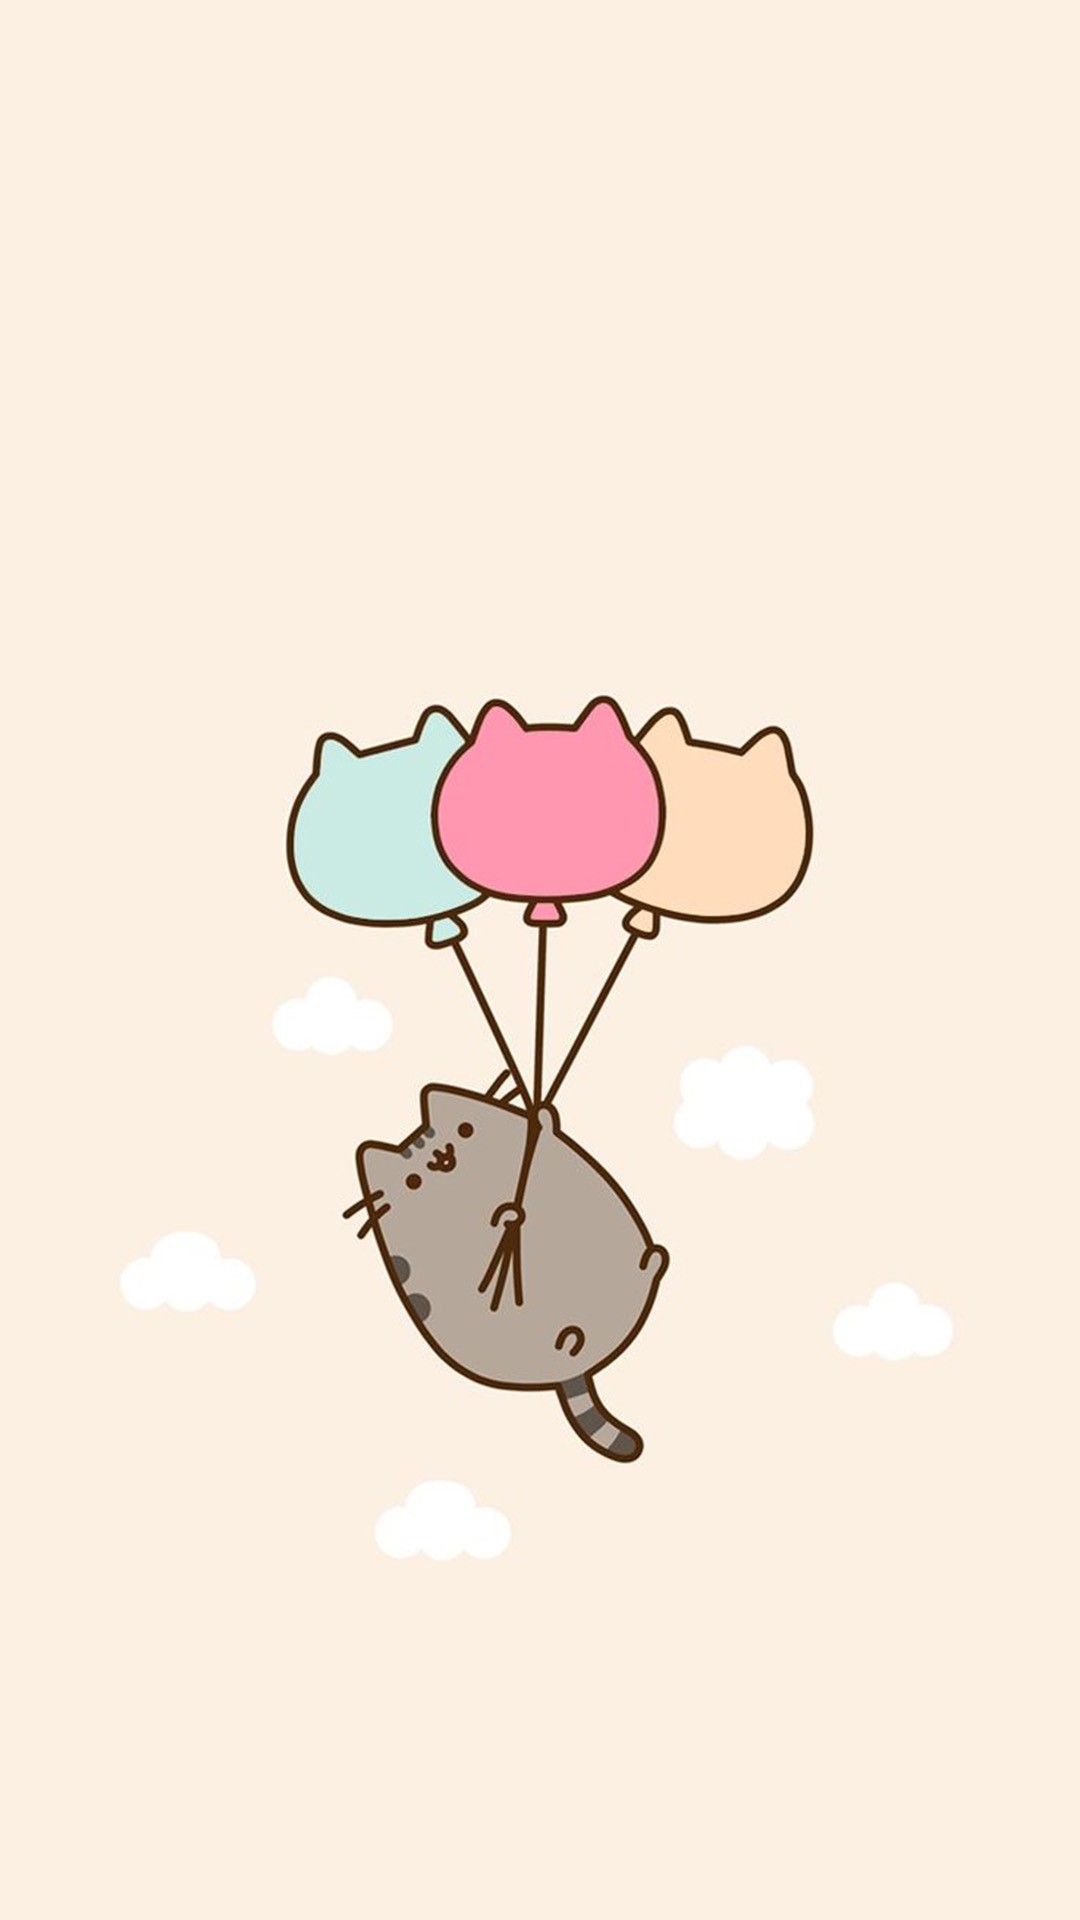 1080x1920 Pusheen the cat ballons / We Heart It on imgfave